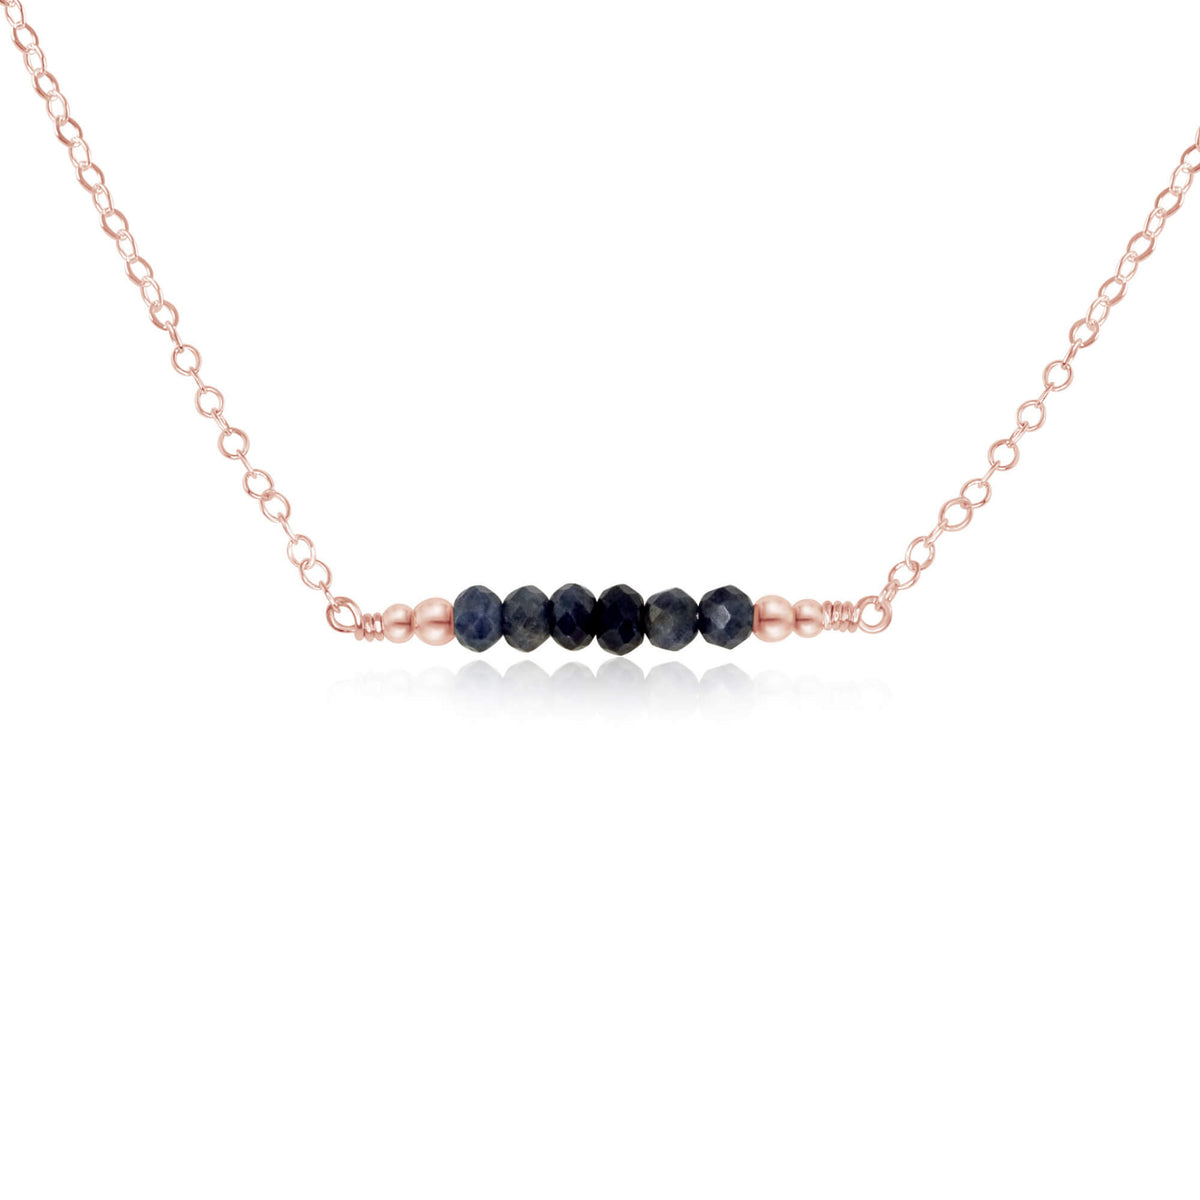 Faceted Bead Bar Necklace - Sapphire - 14K Rose Gold Fill - Luna Tide Handmade Jewellery